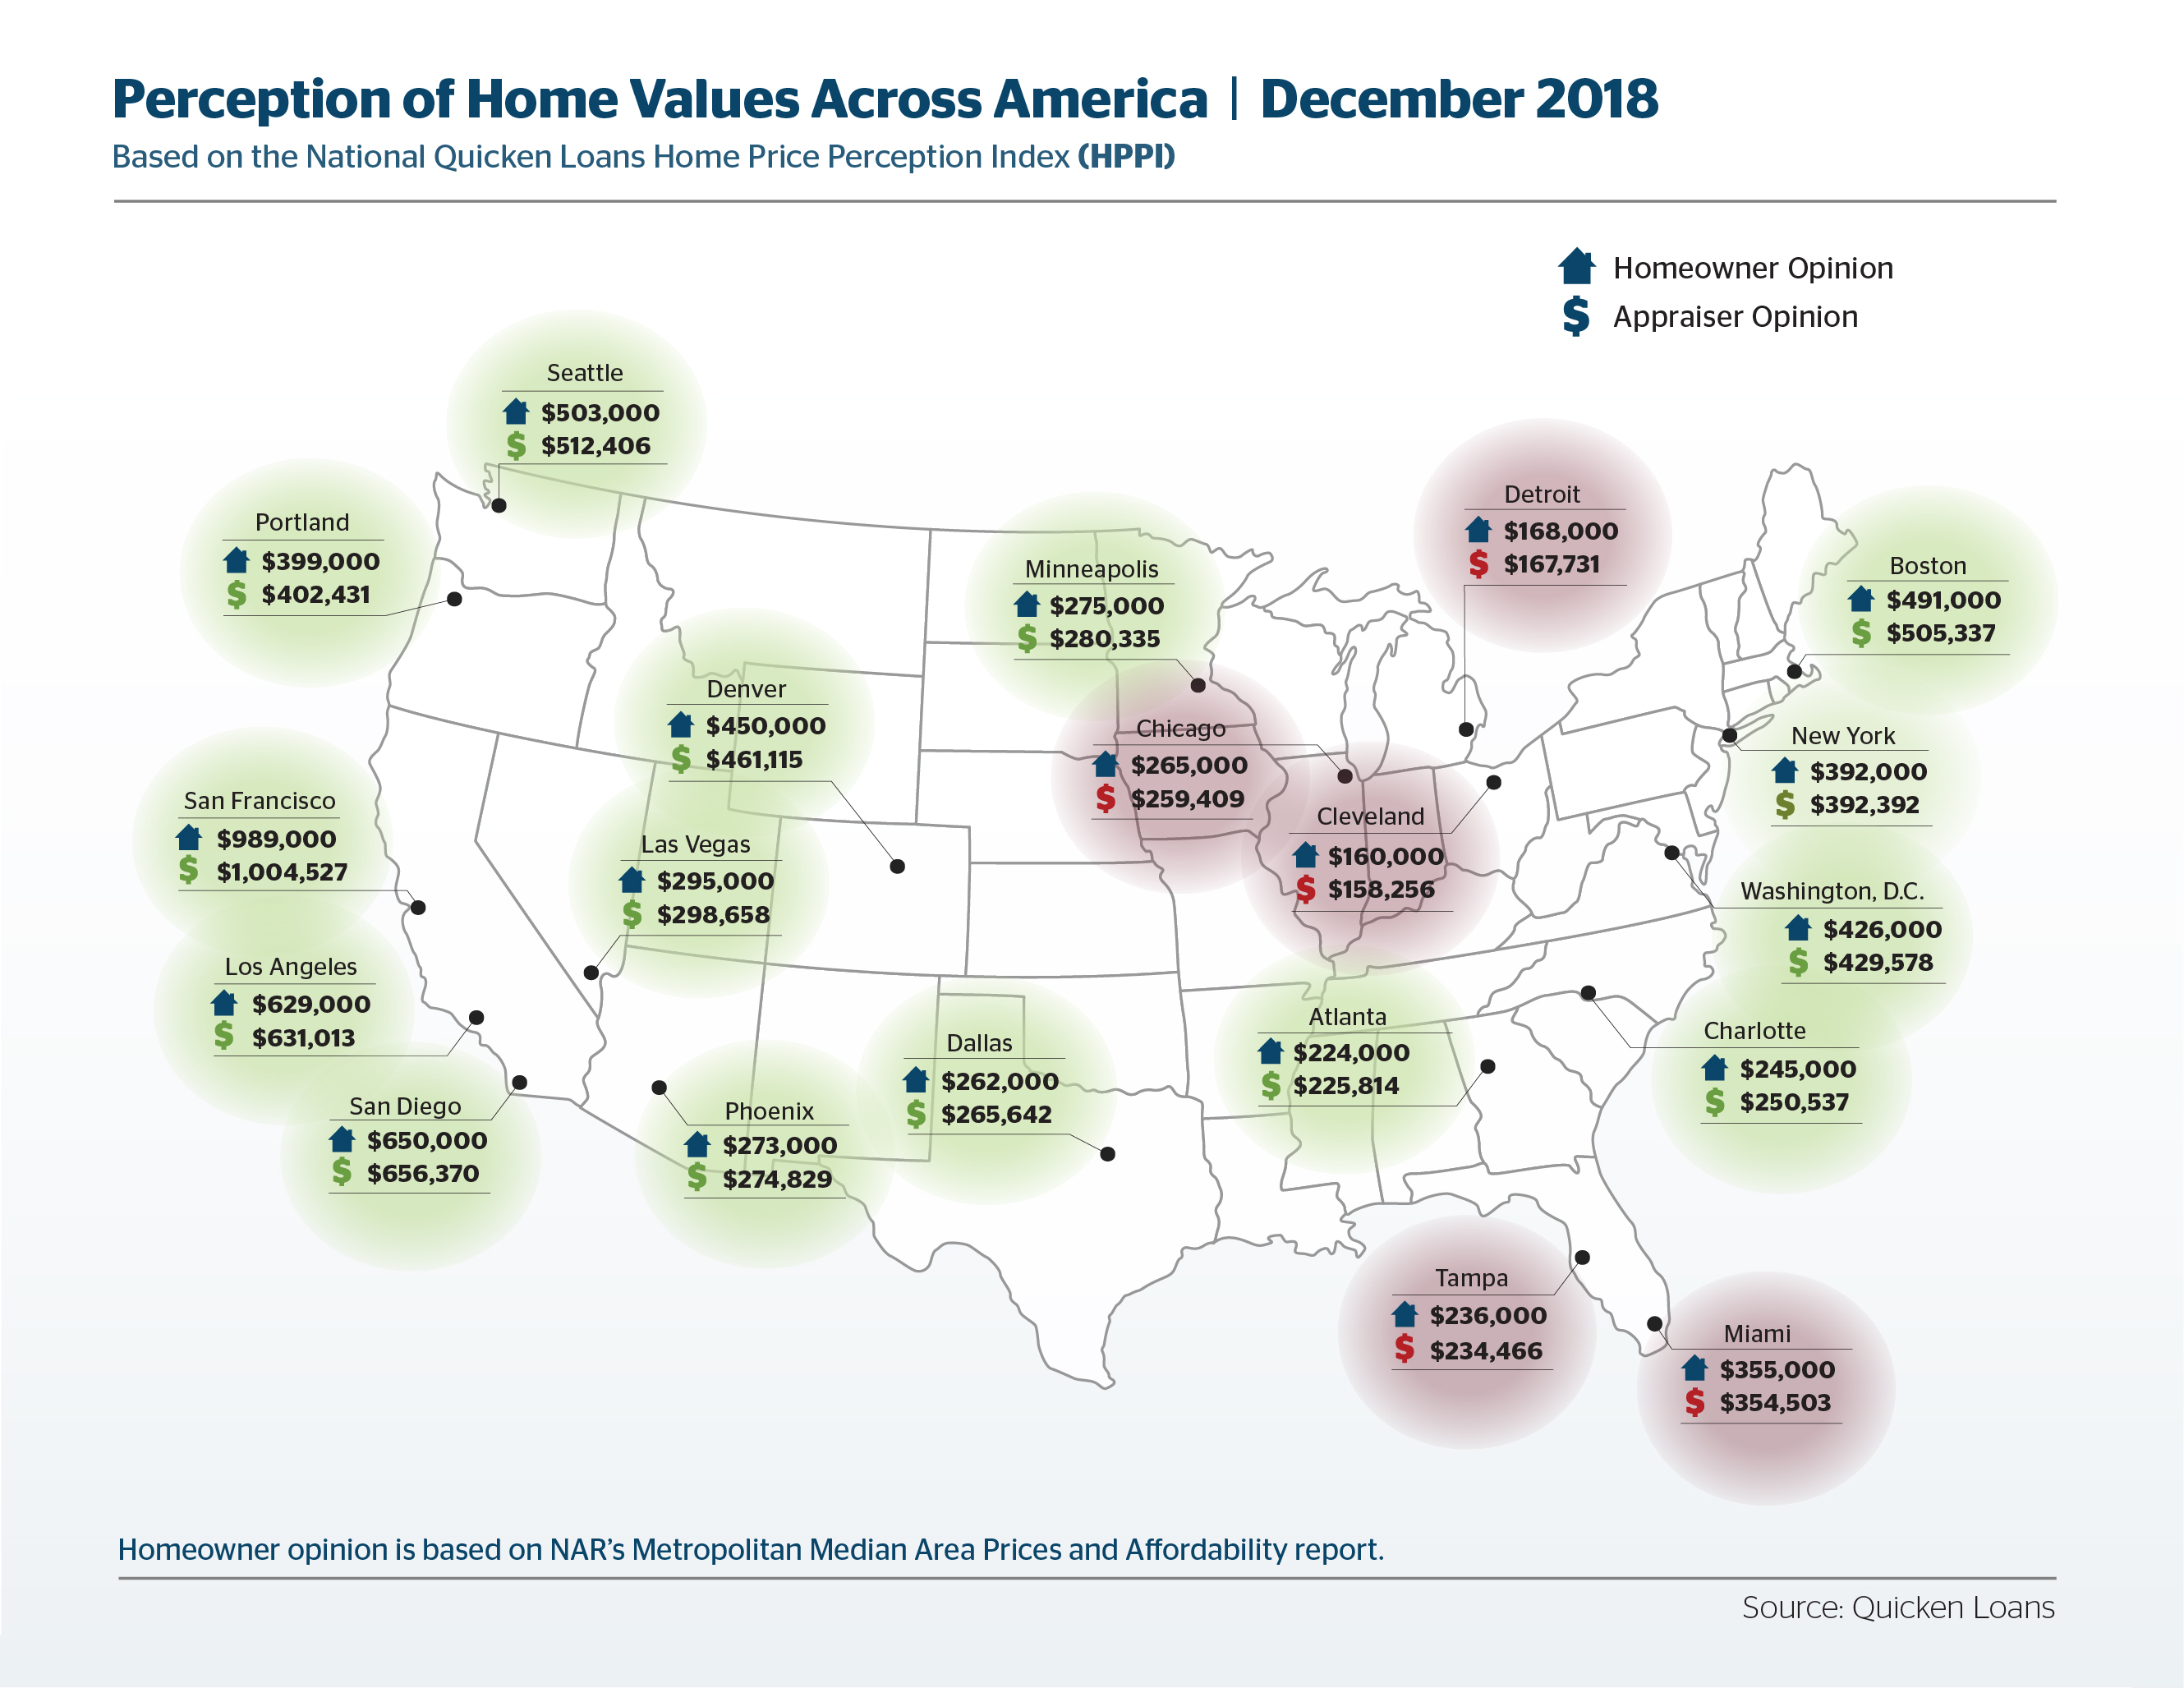 The gap between how homeowners and appraisers view residential values widened slightly in November, according to new data from Quicken Loans